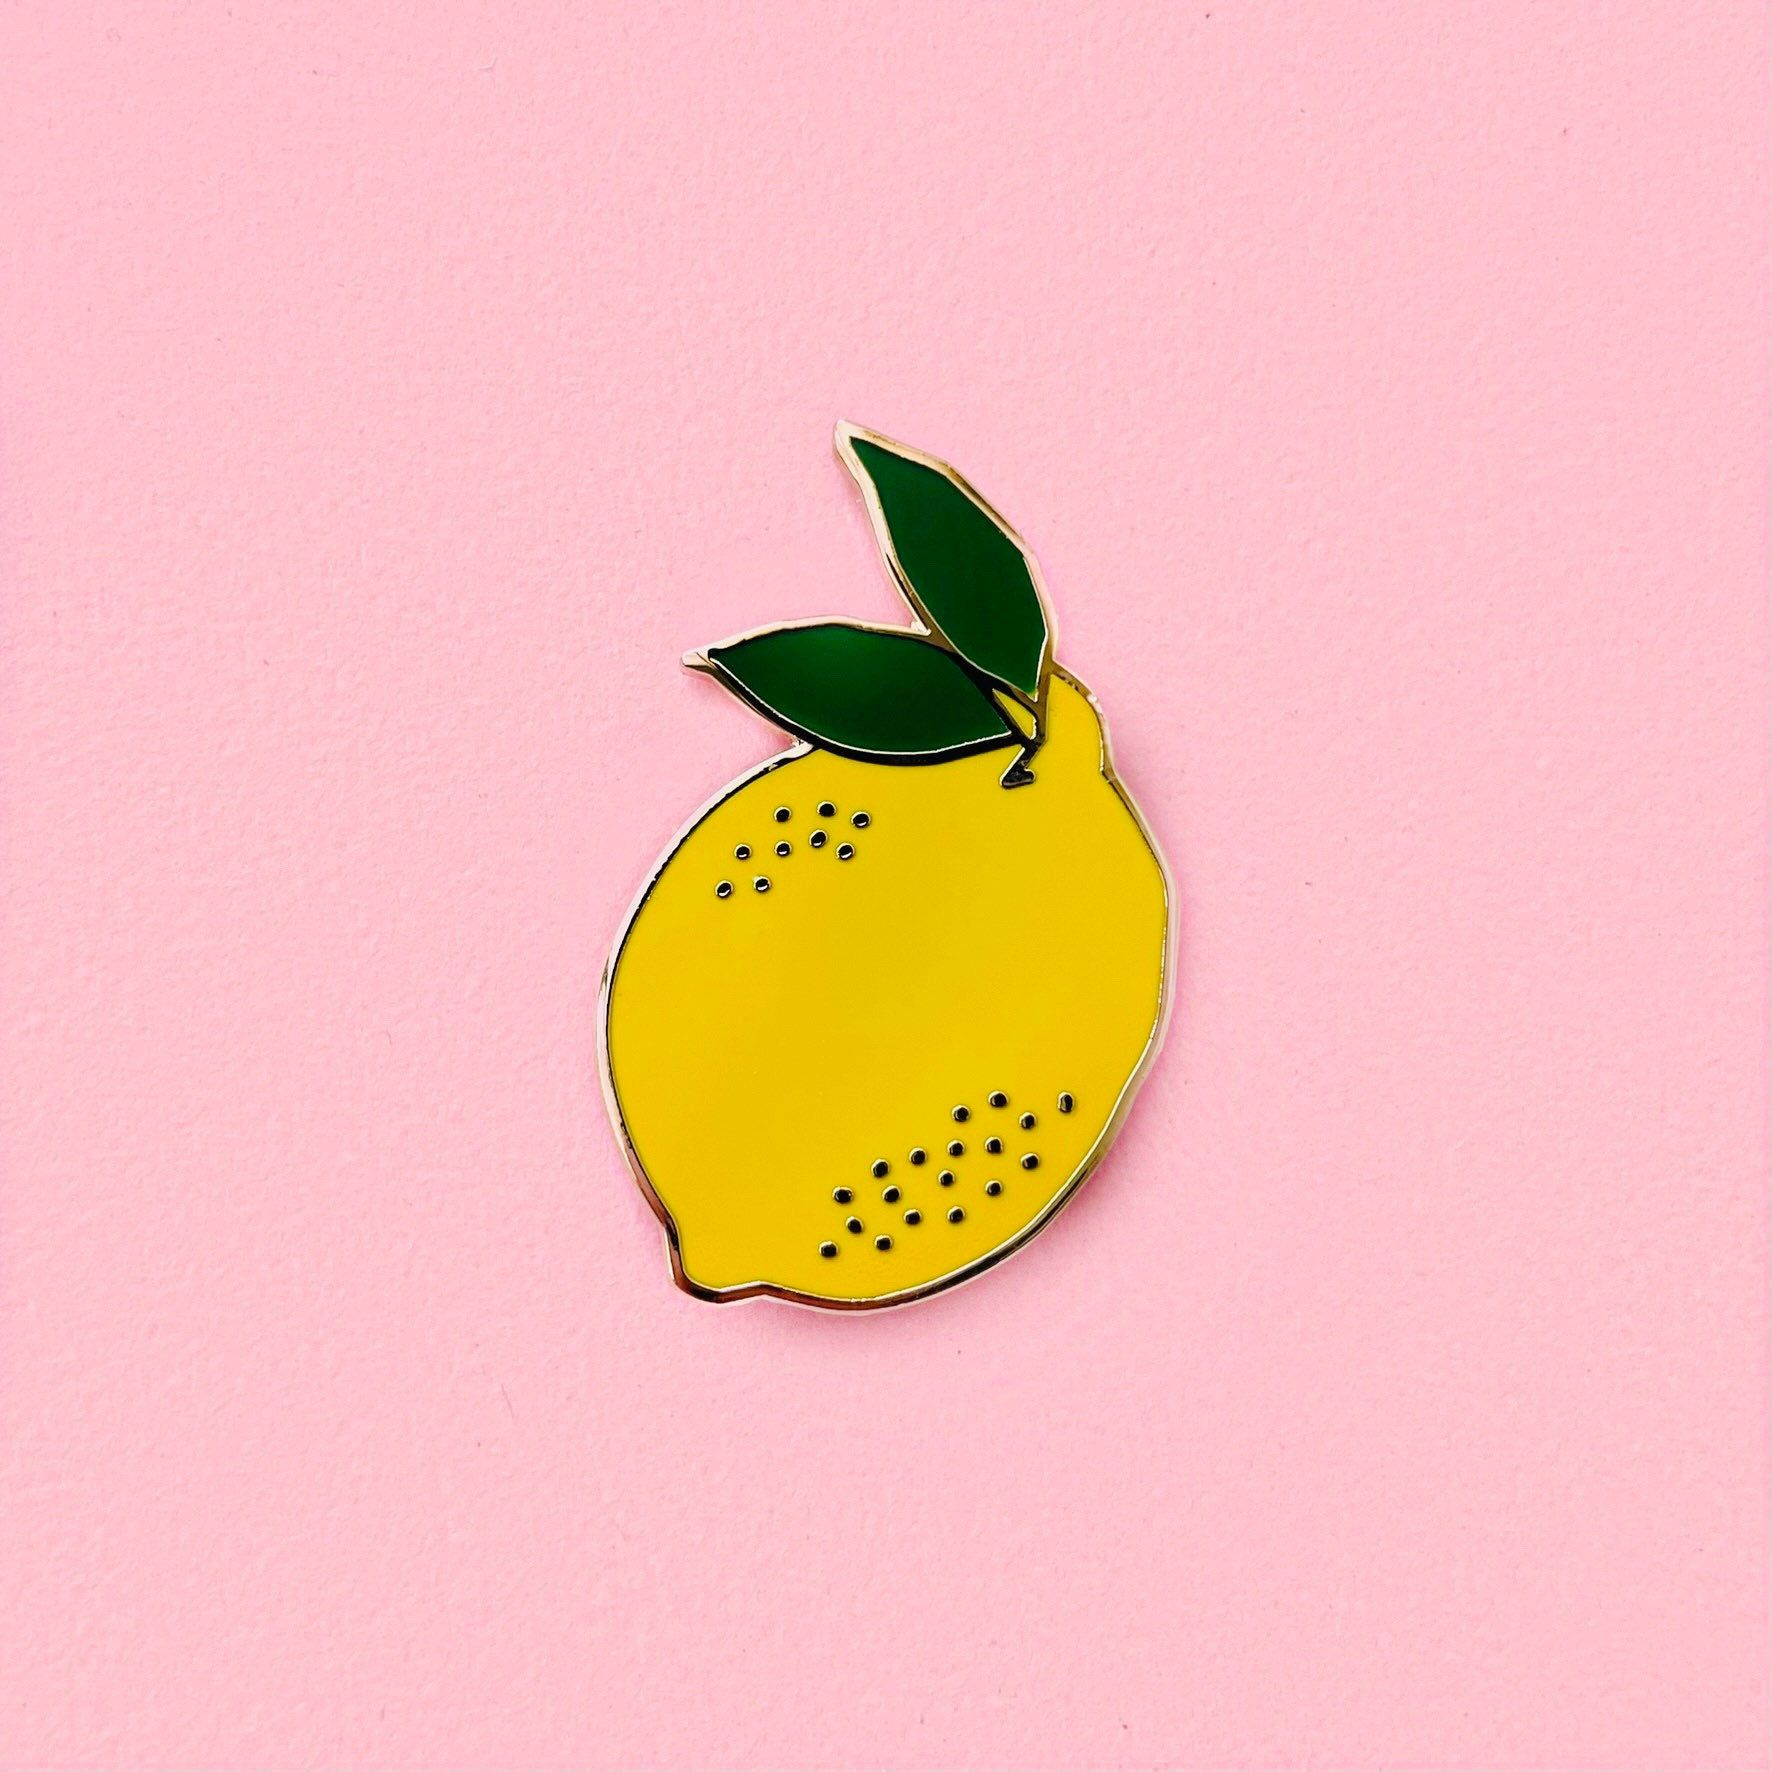 A lemon enamel pin with two leaves on top, all in front of a pink background - Lemon